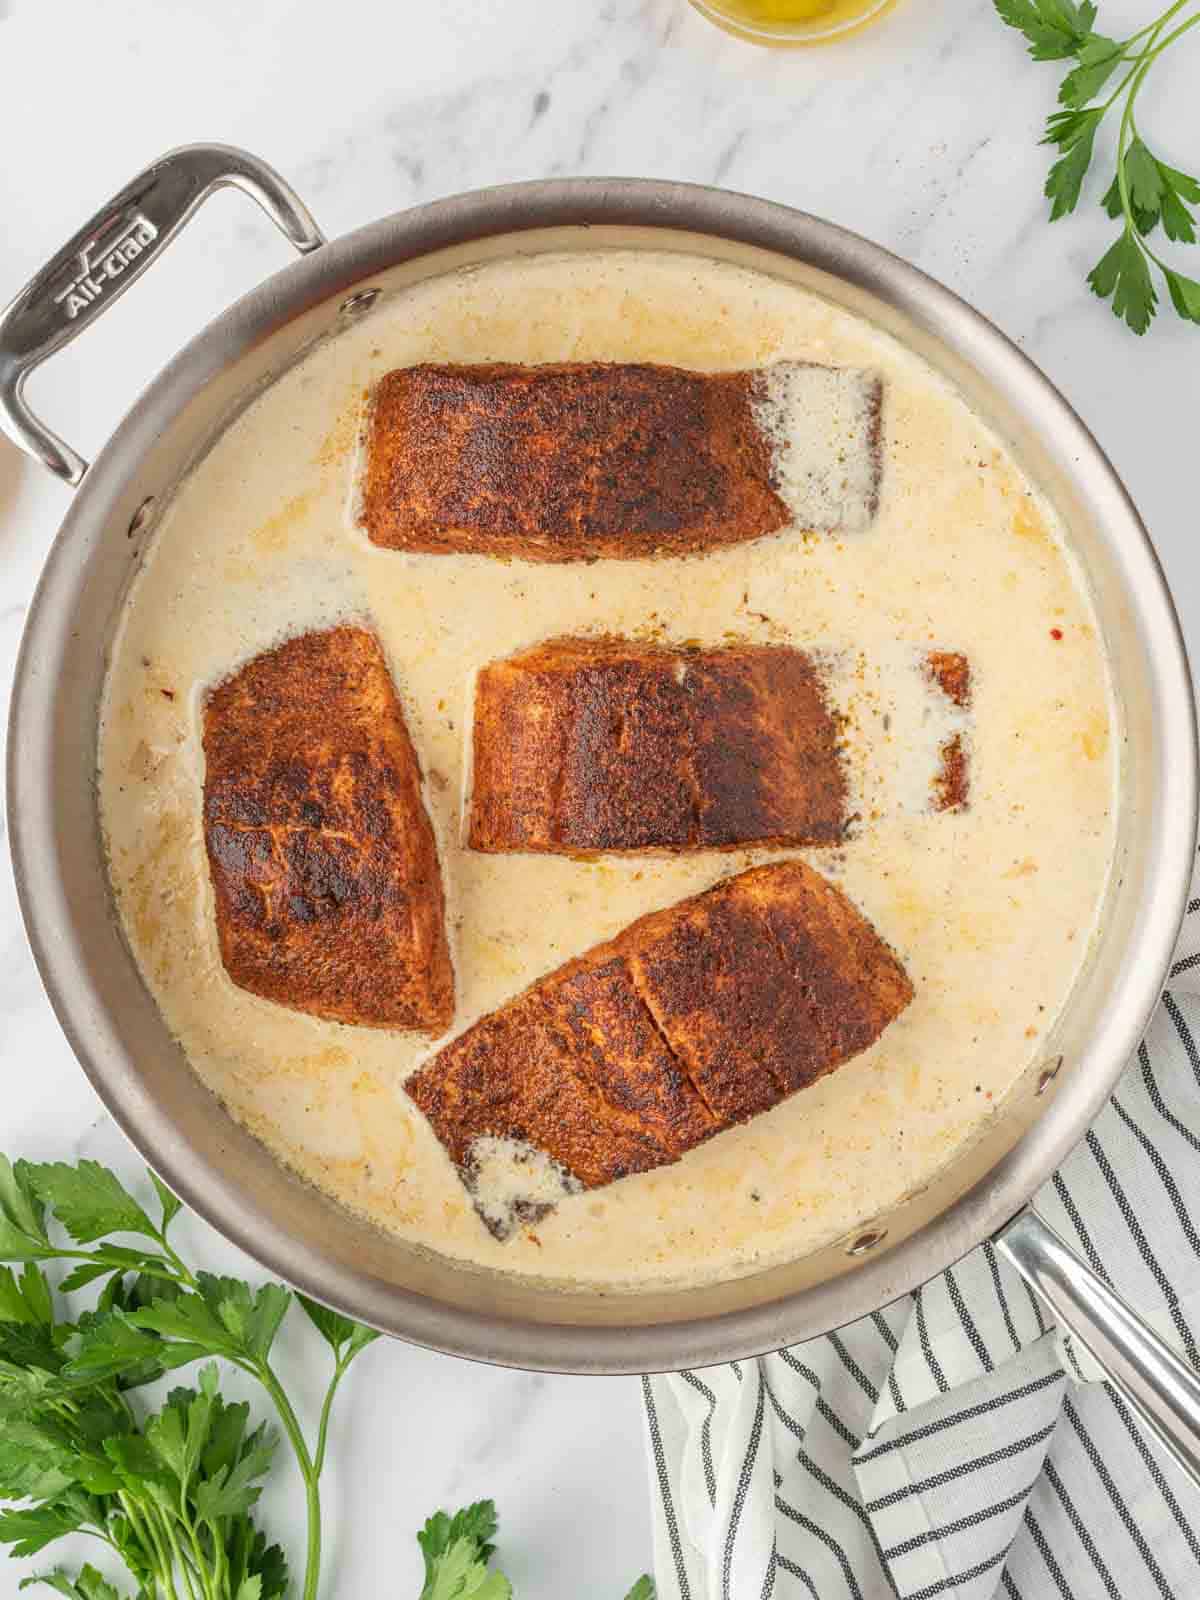 Blackened salmon in a skillet with creamy sauce.